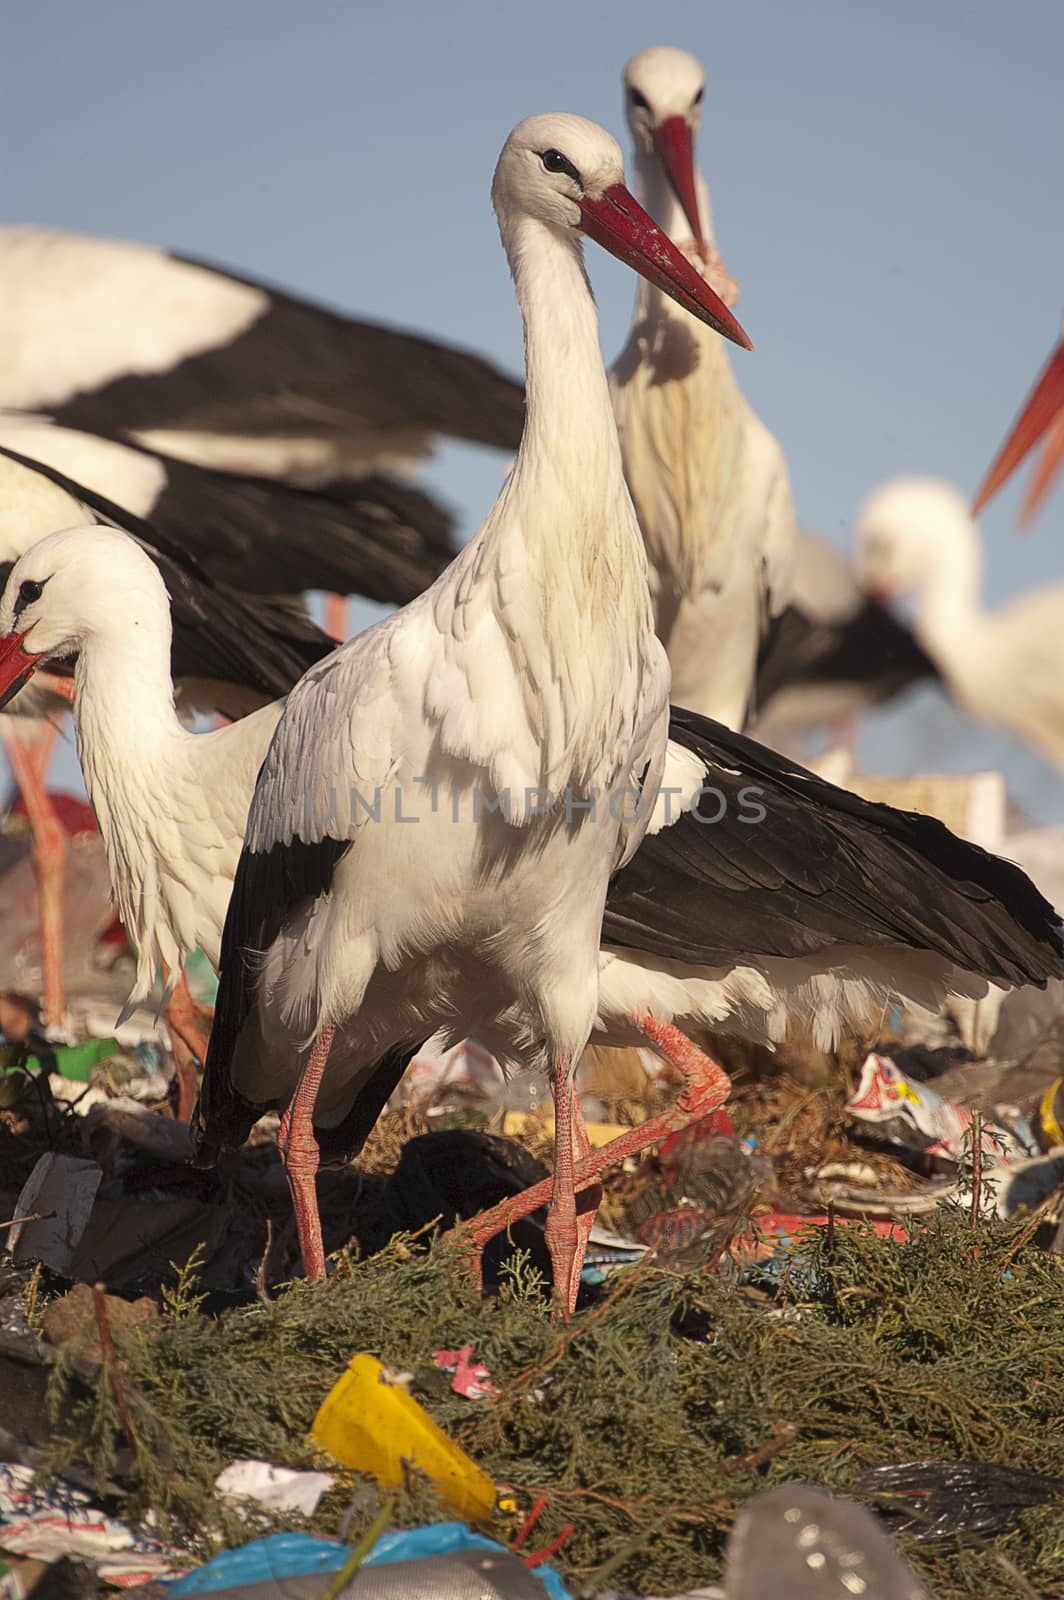 Group of white stork in the garbage, Ciconia ciconia by jalonsohu@gmail.com